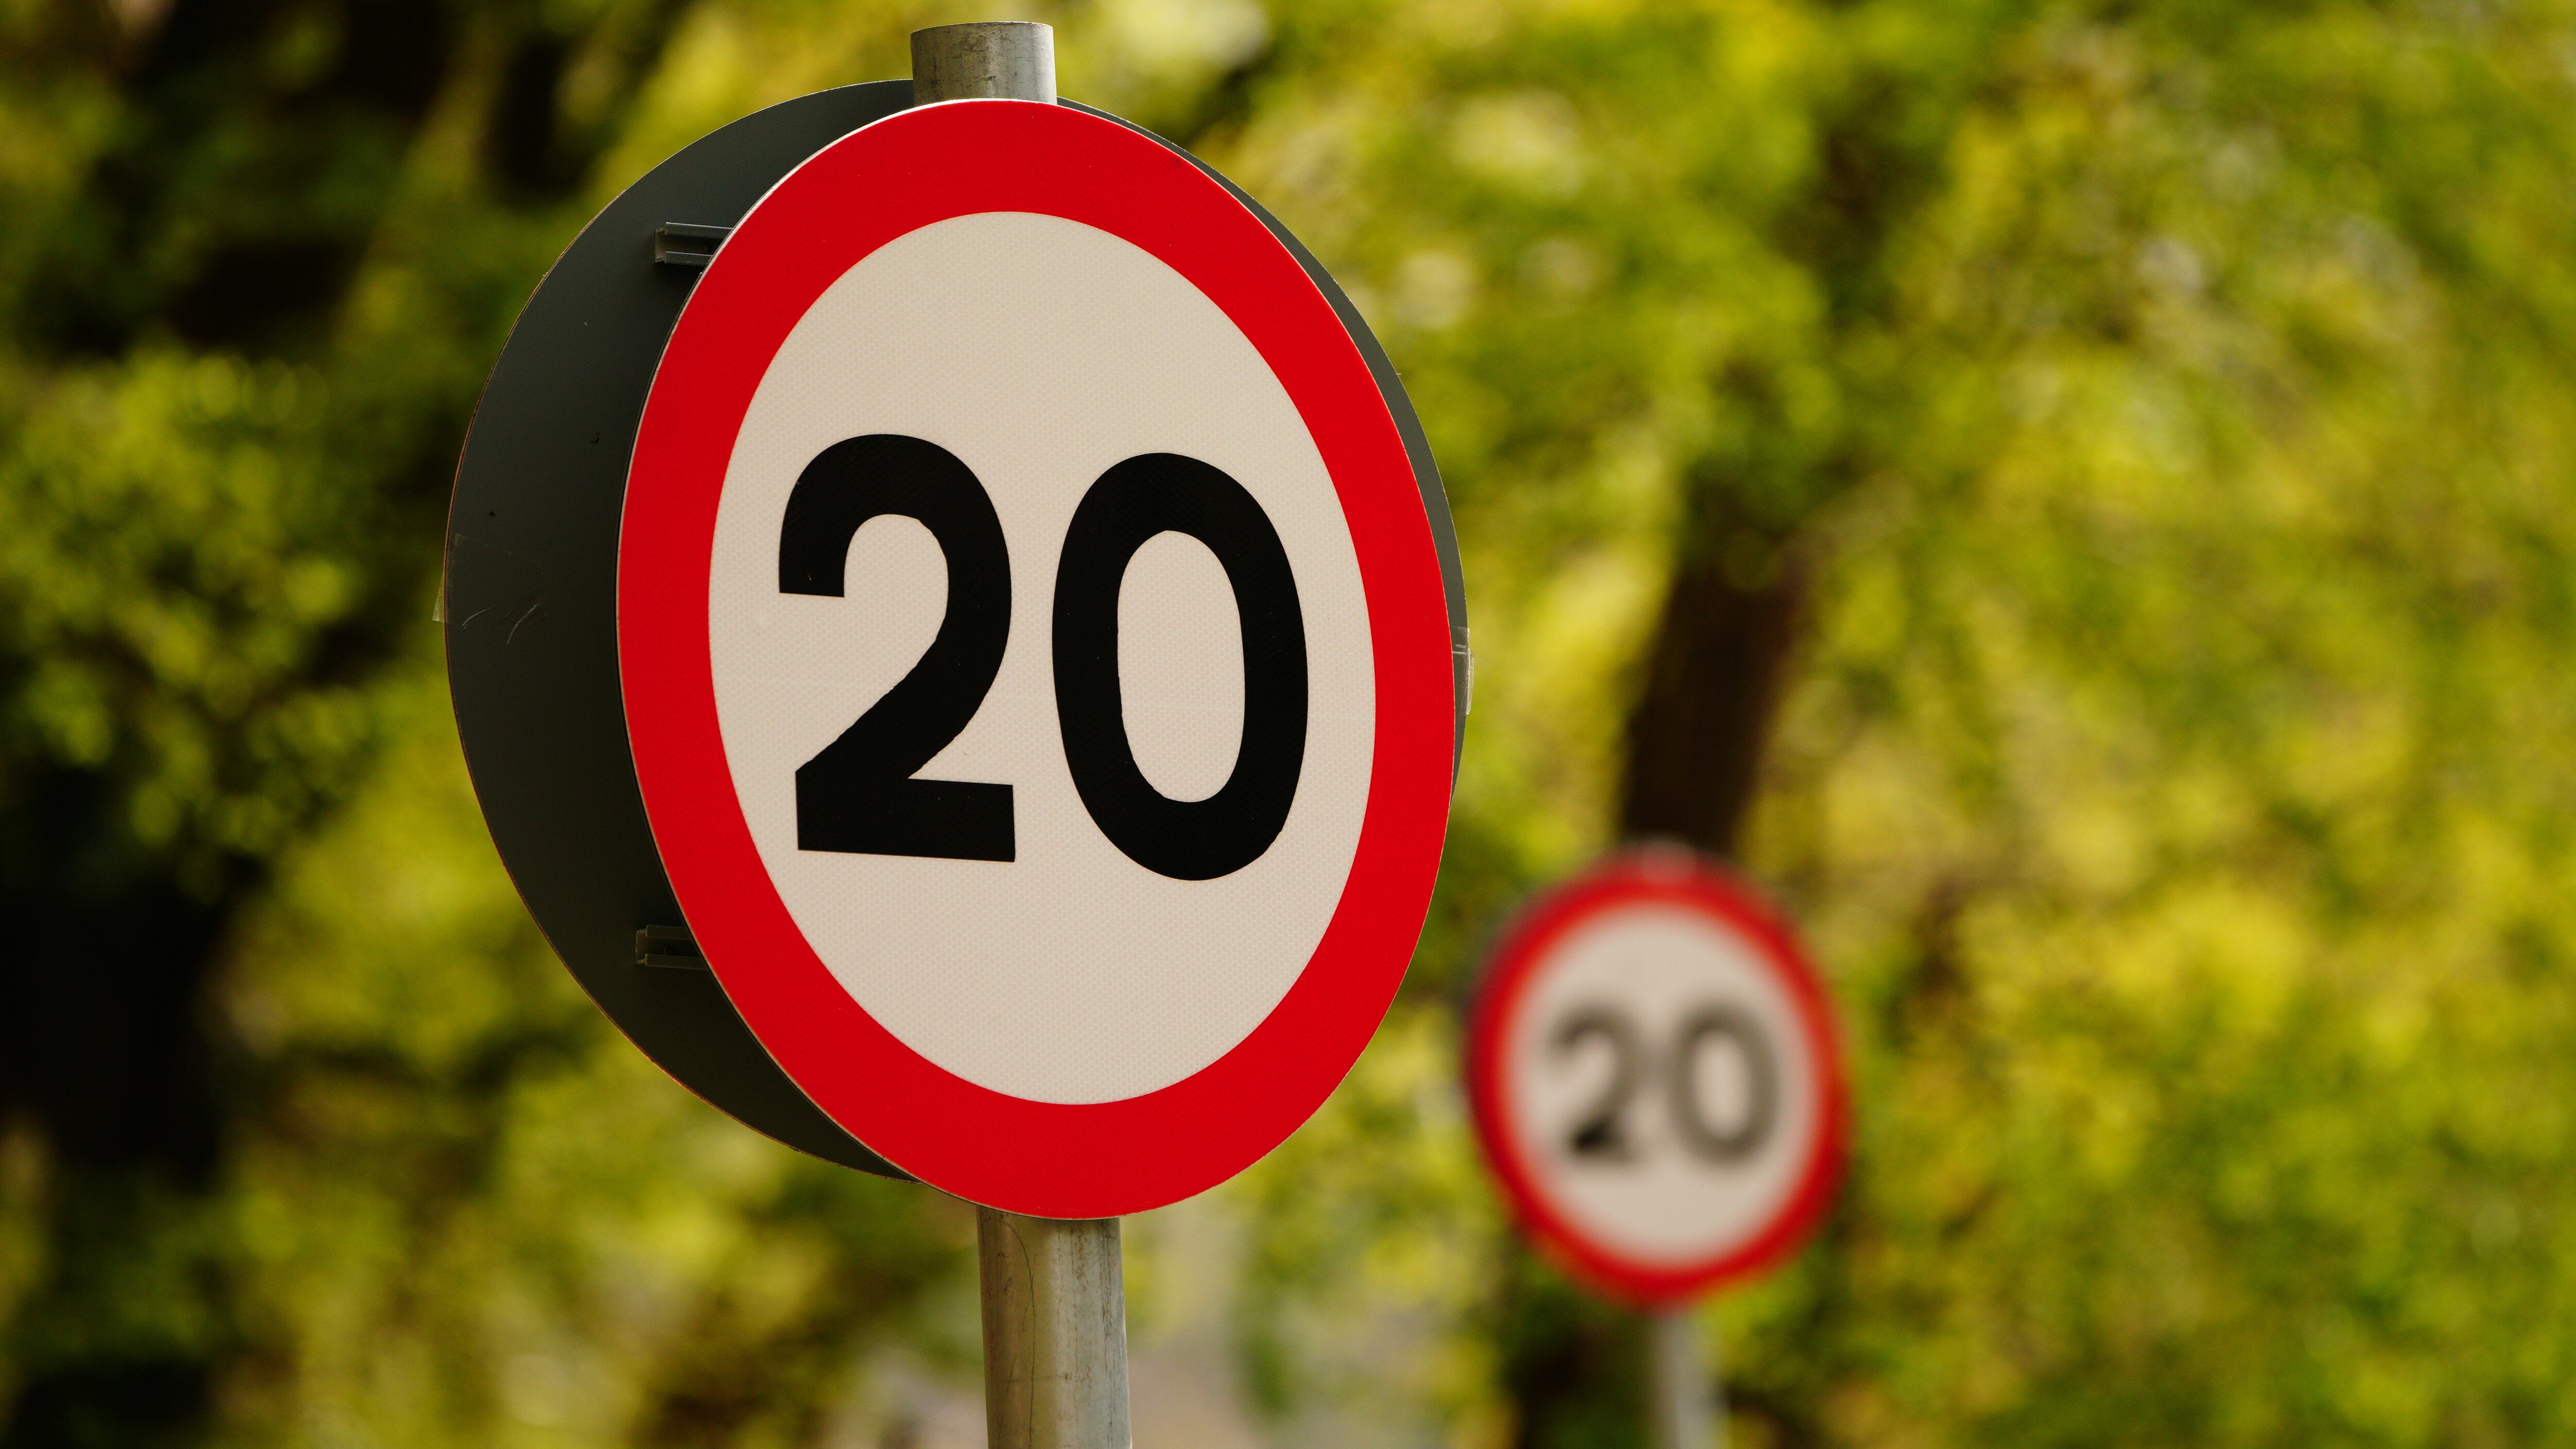 Wales dropped the default speed limit on restricted roads last year